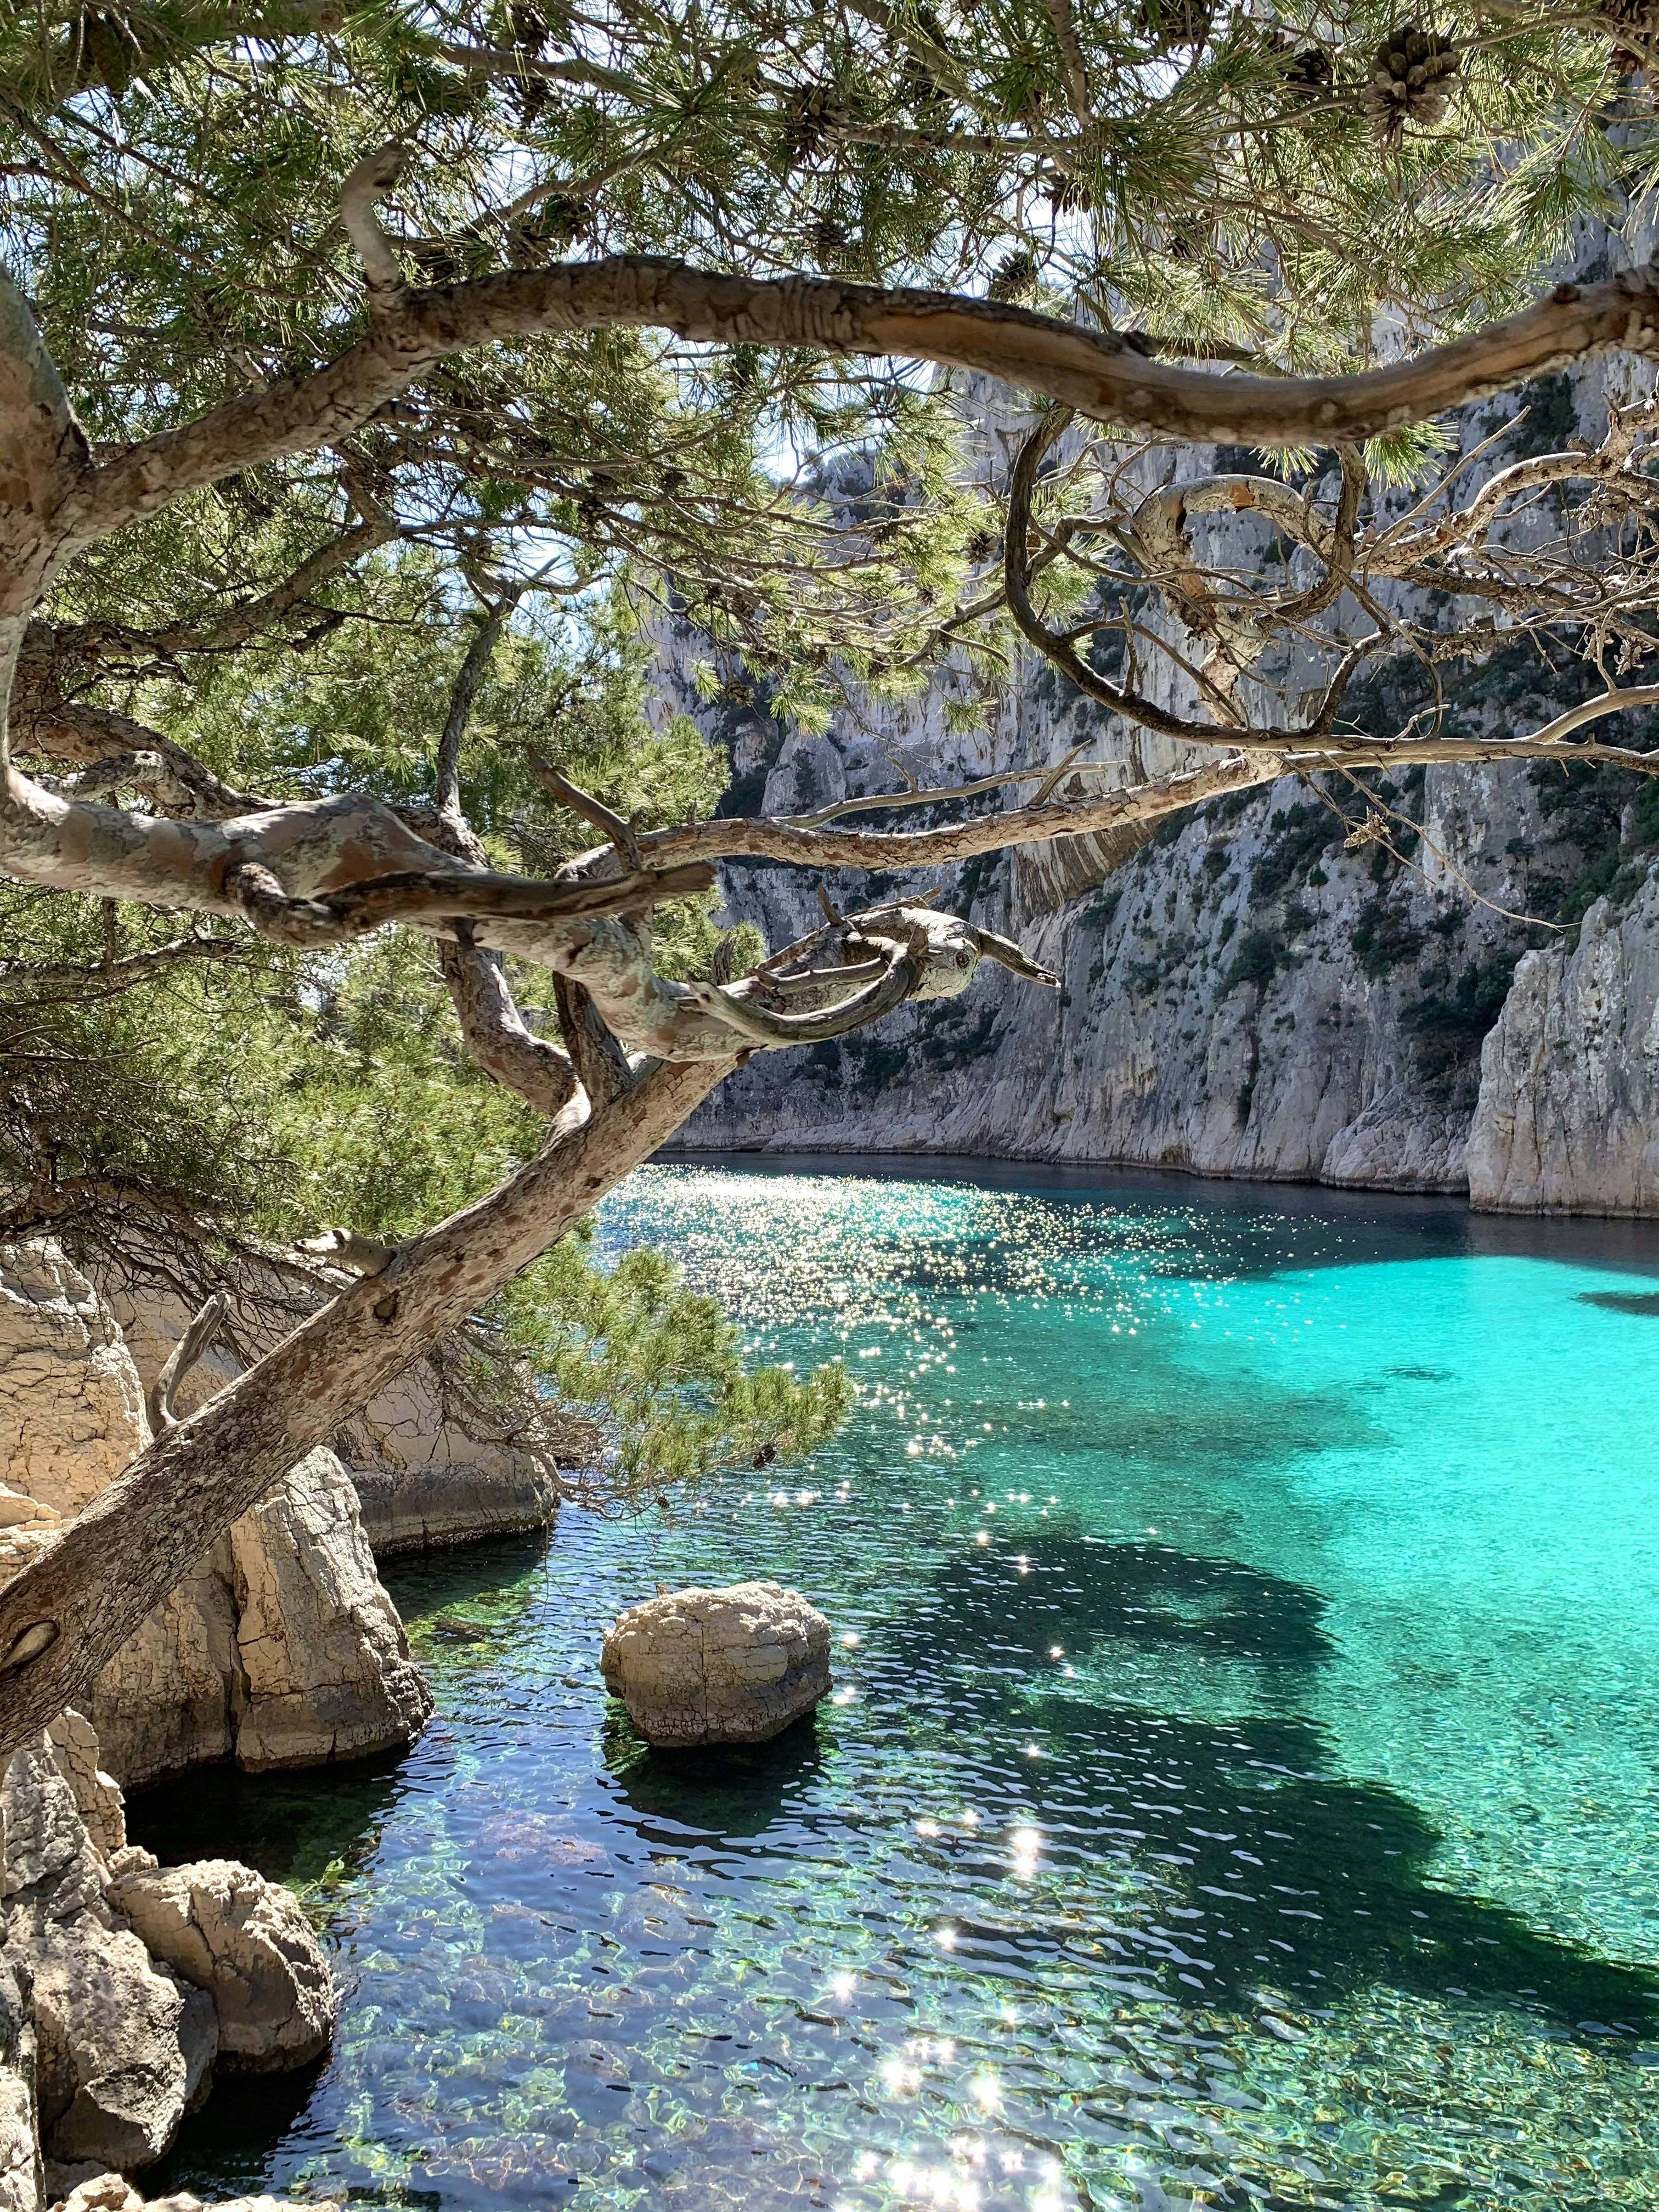 Calanques - Marseille, France